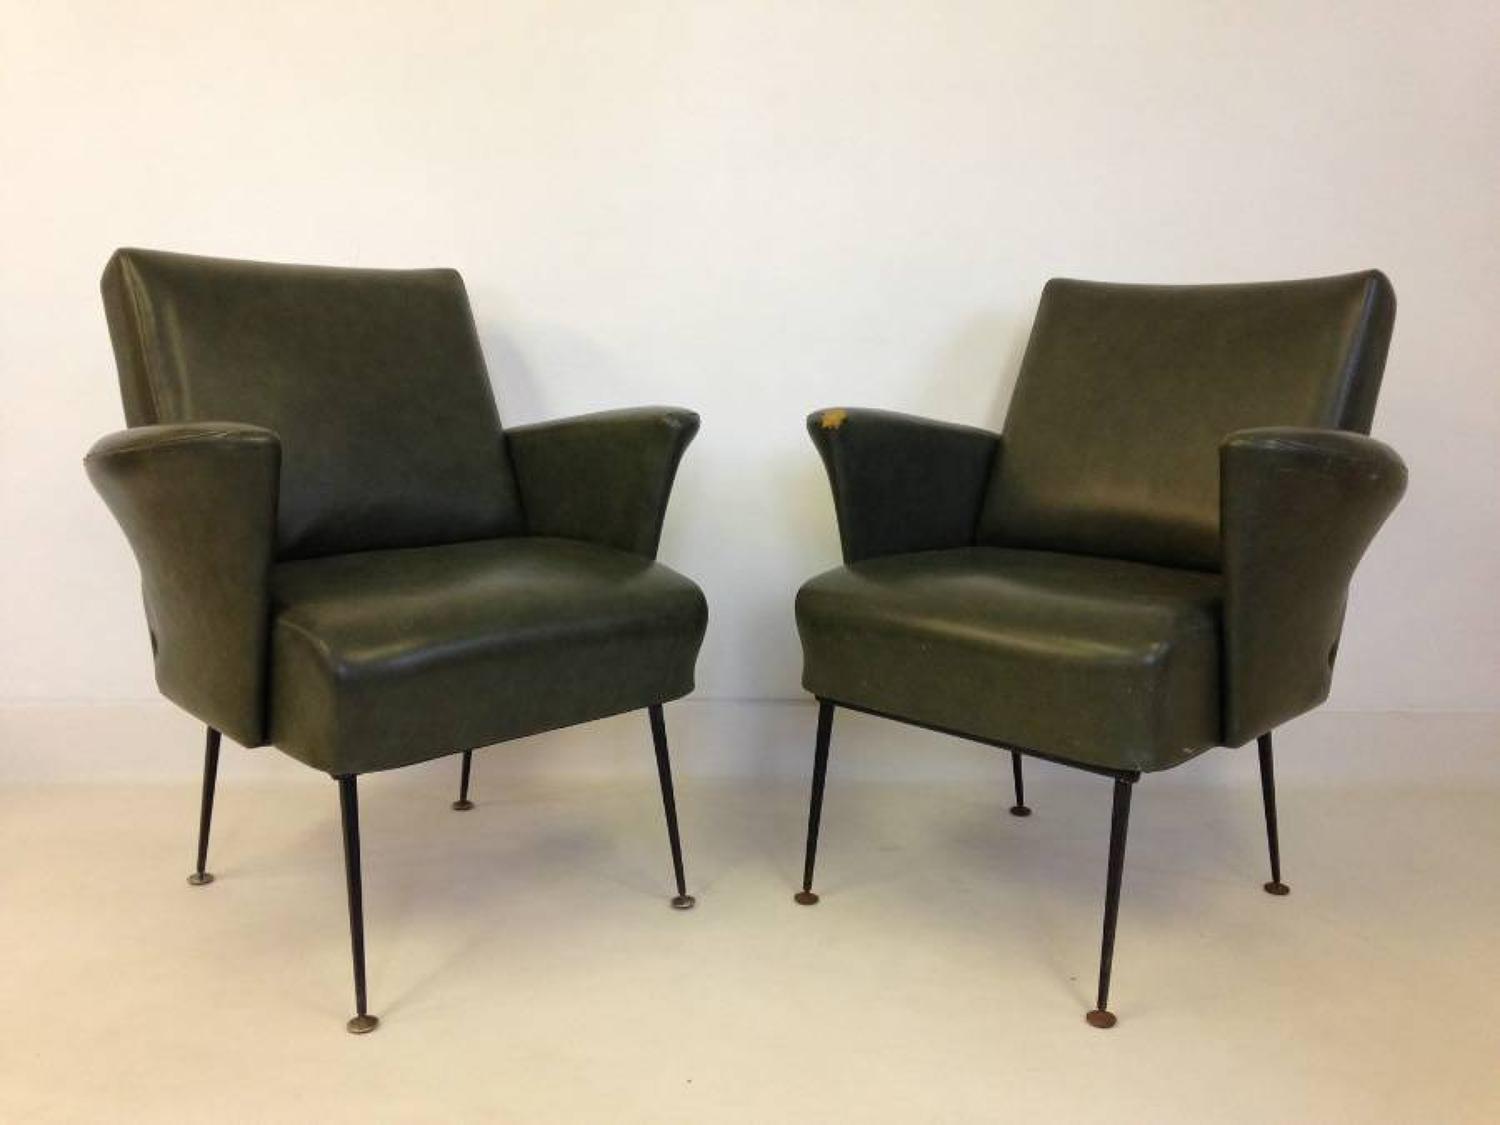 A pair of 1950s French armchairs